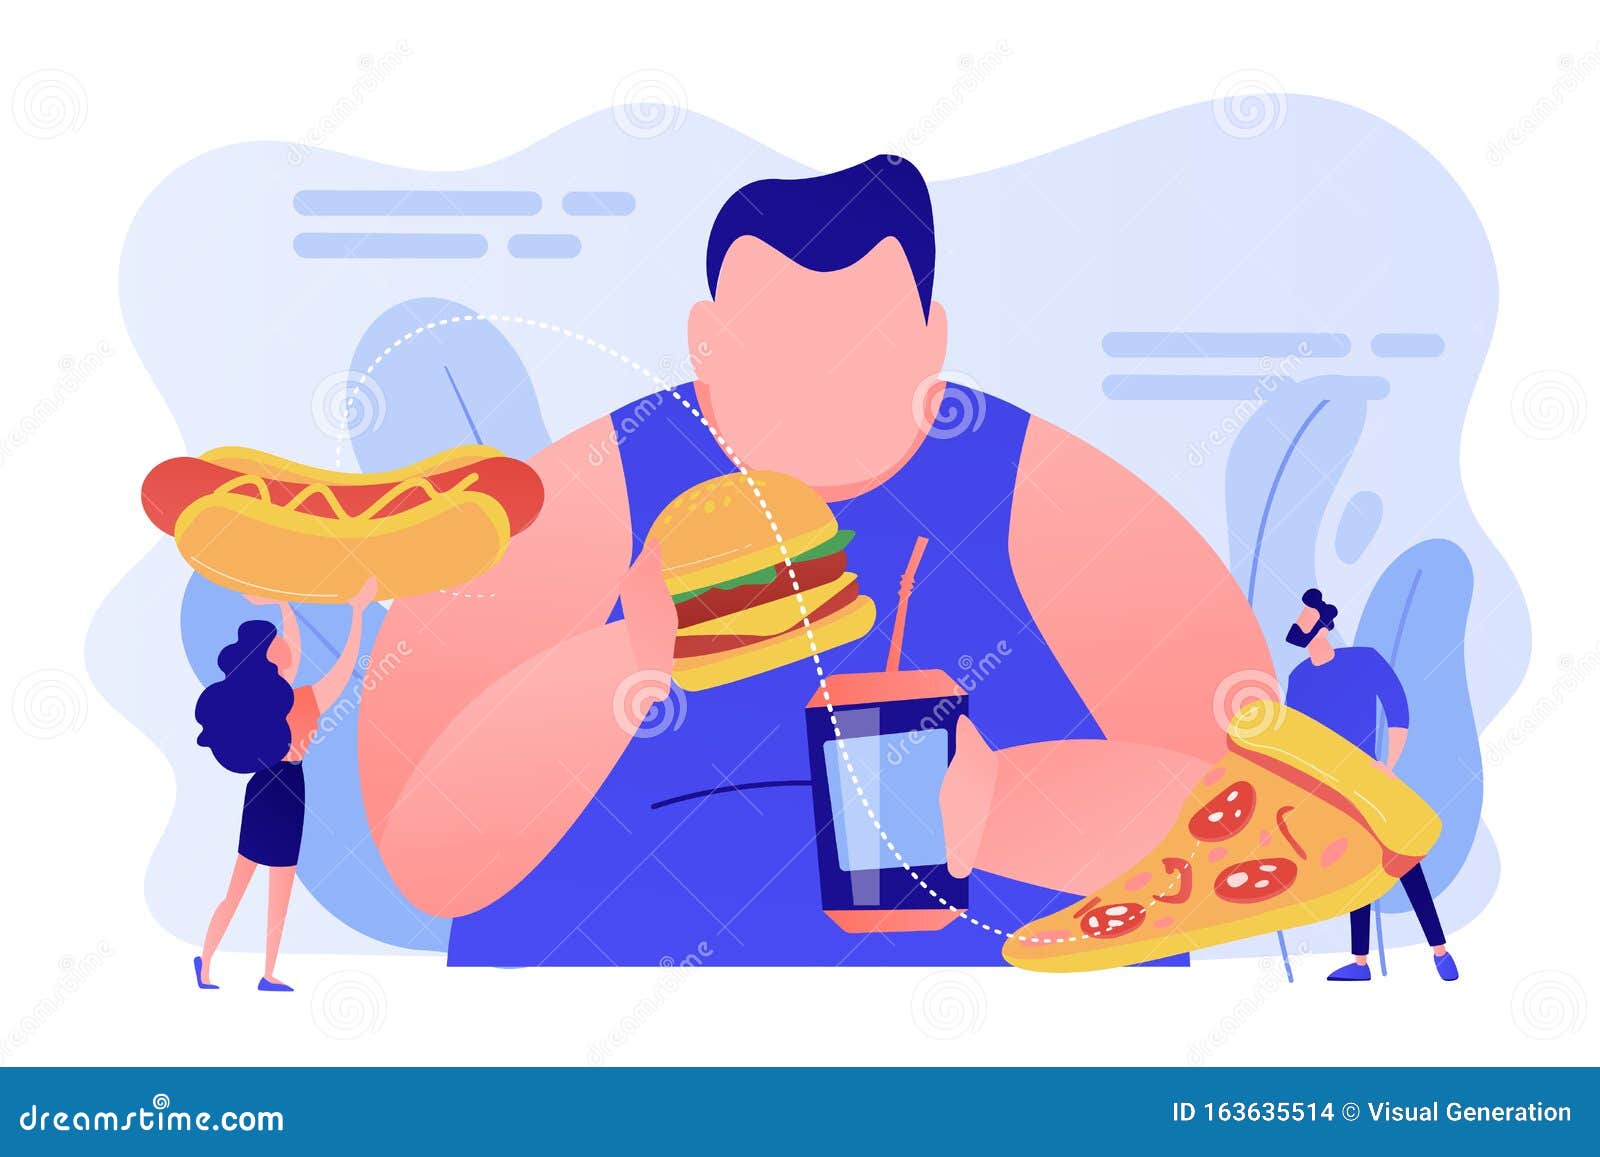 Overeating Cartoons, Illustrations & Vector Stock Images - 1467